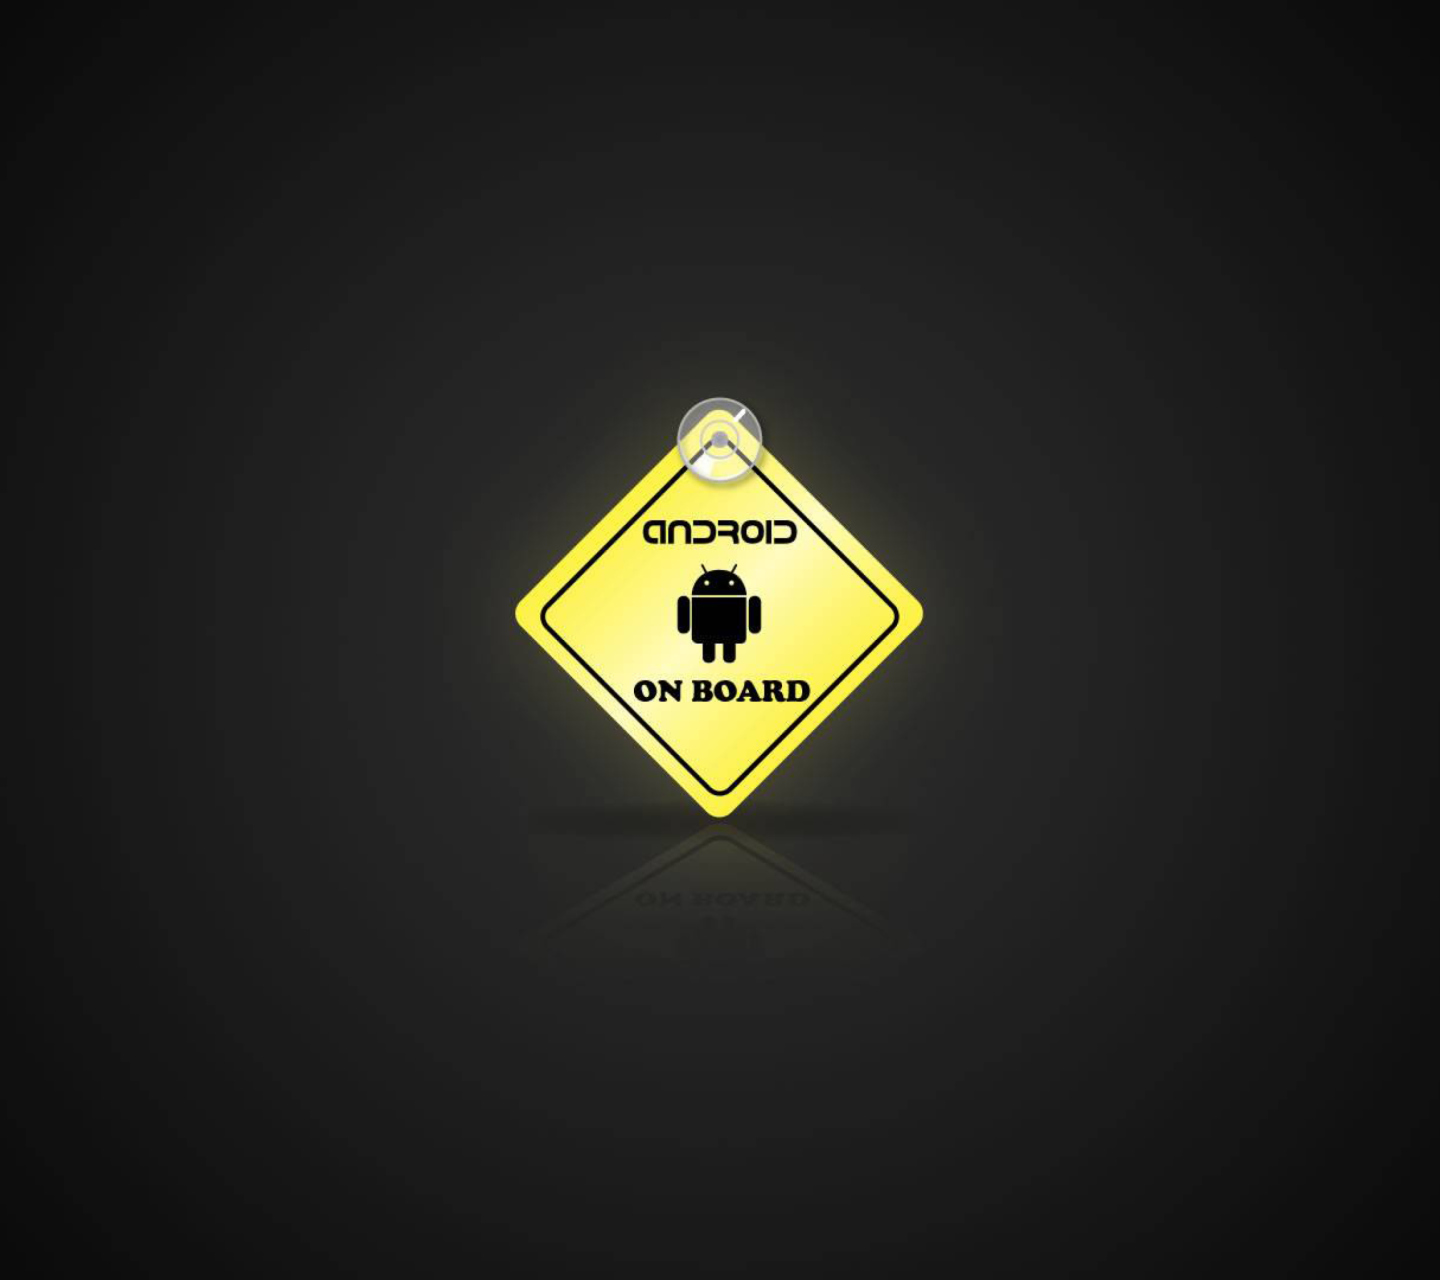 Android On Board wallpaper 1440x1280